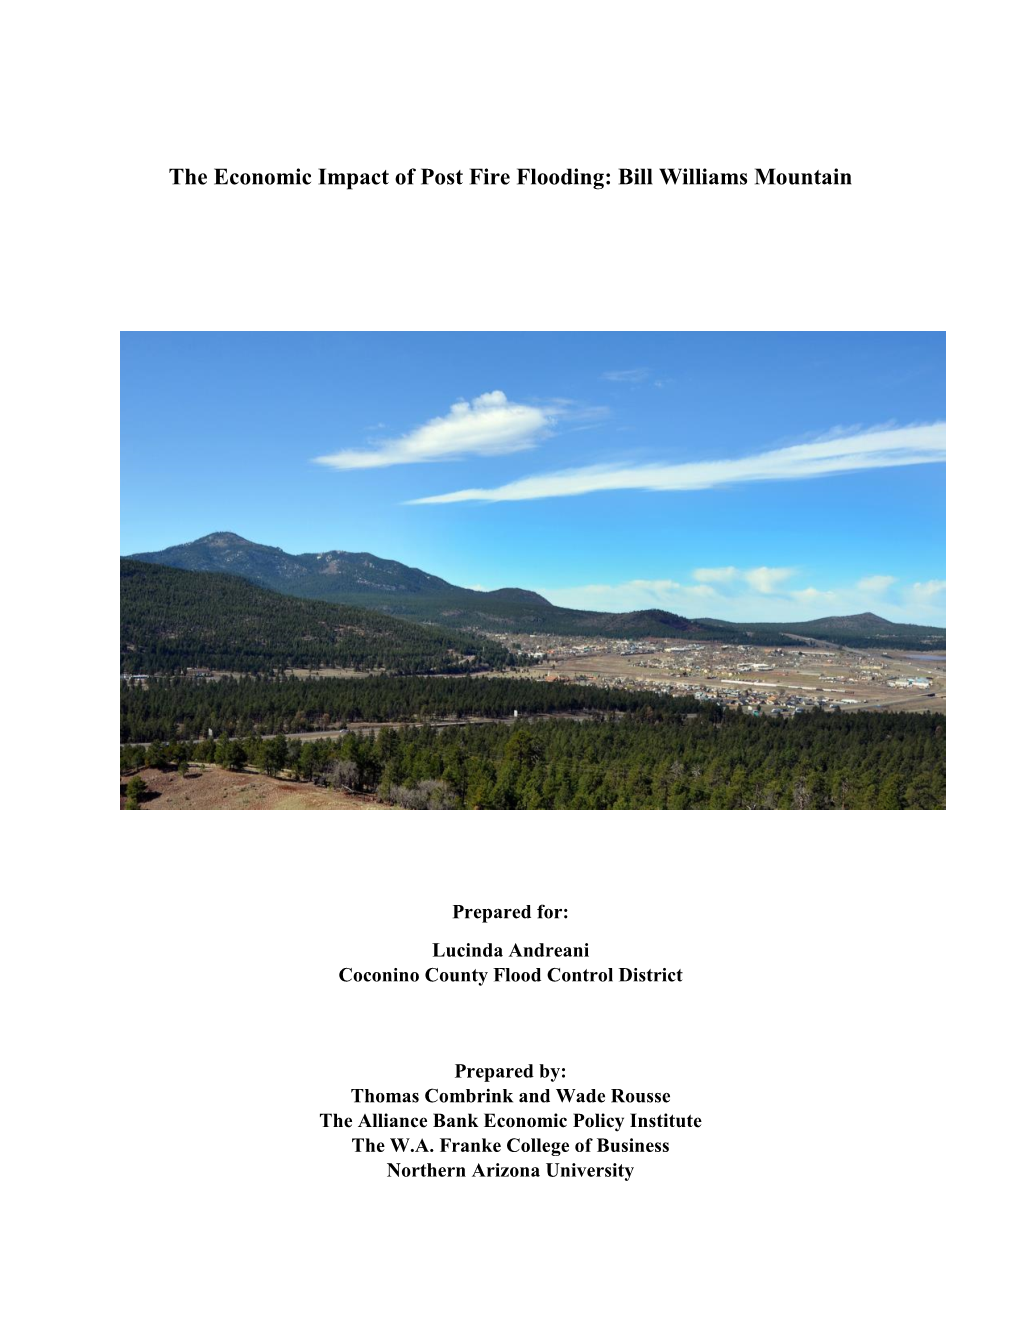 The Economic Impact of Post Fire Flooding: Bill Williams Mountain